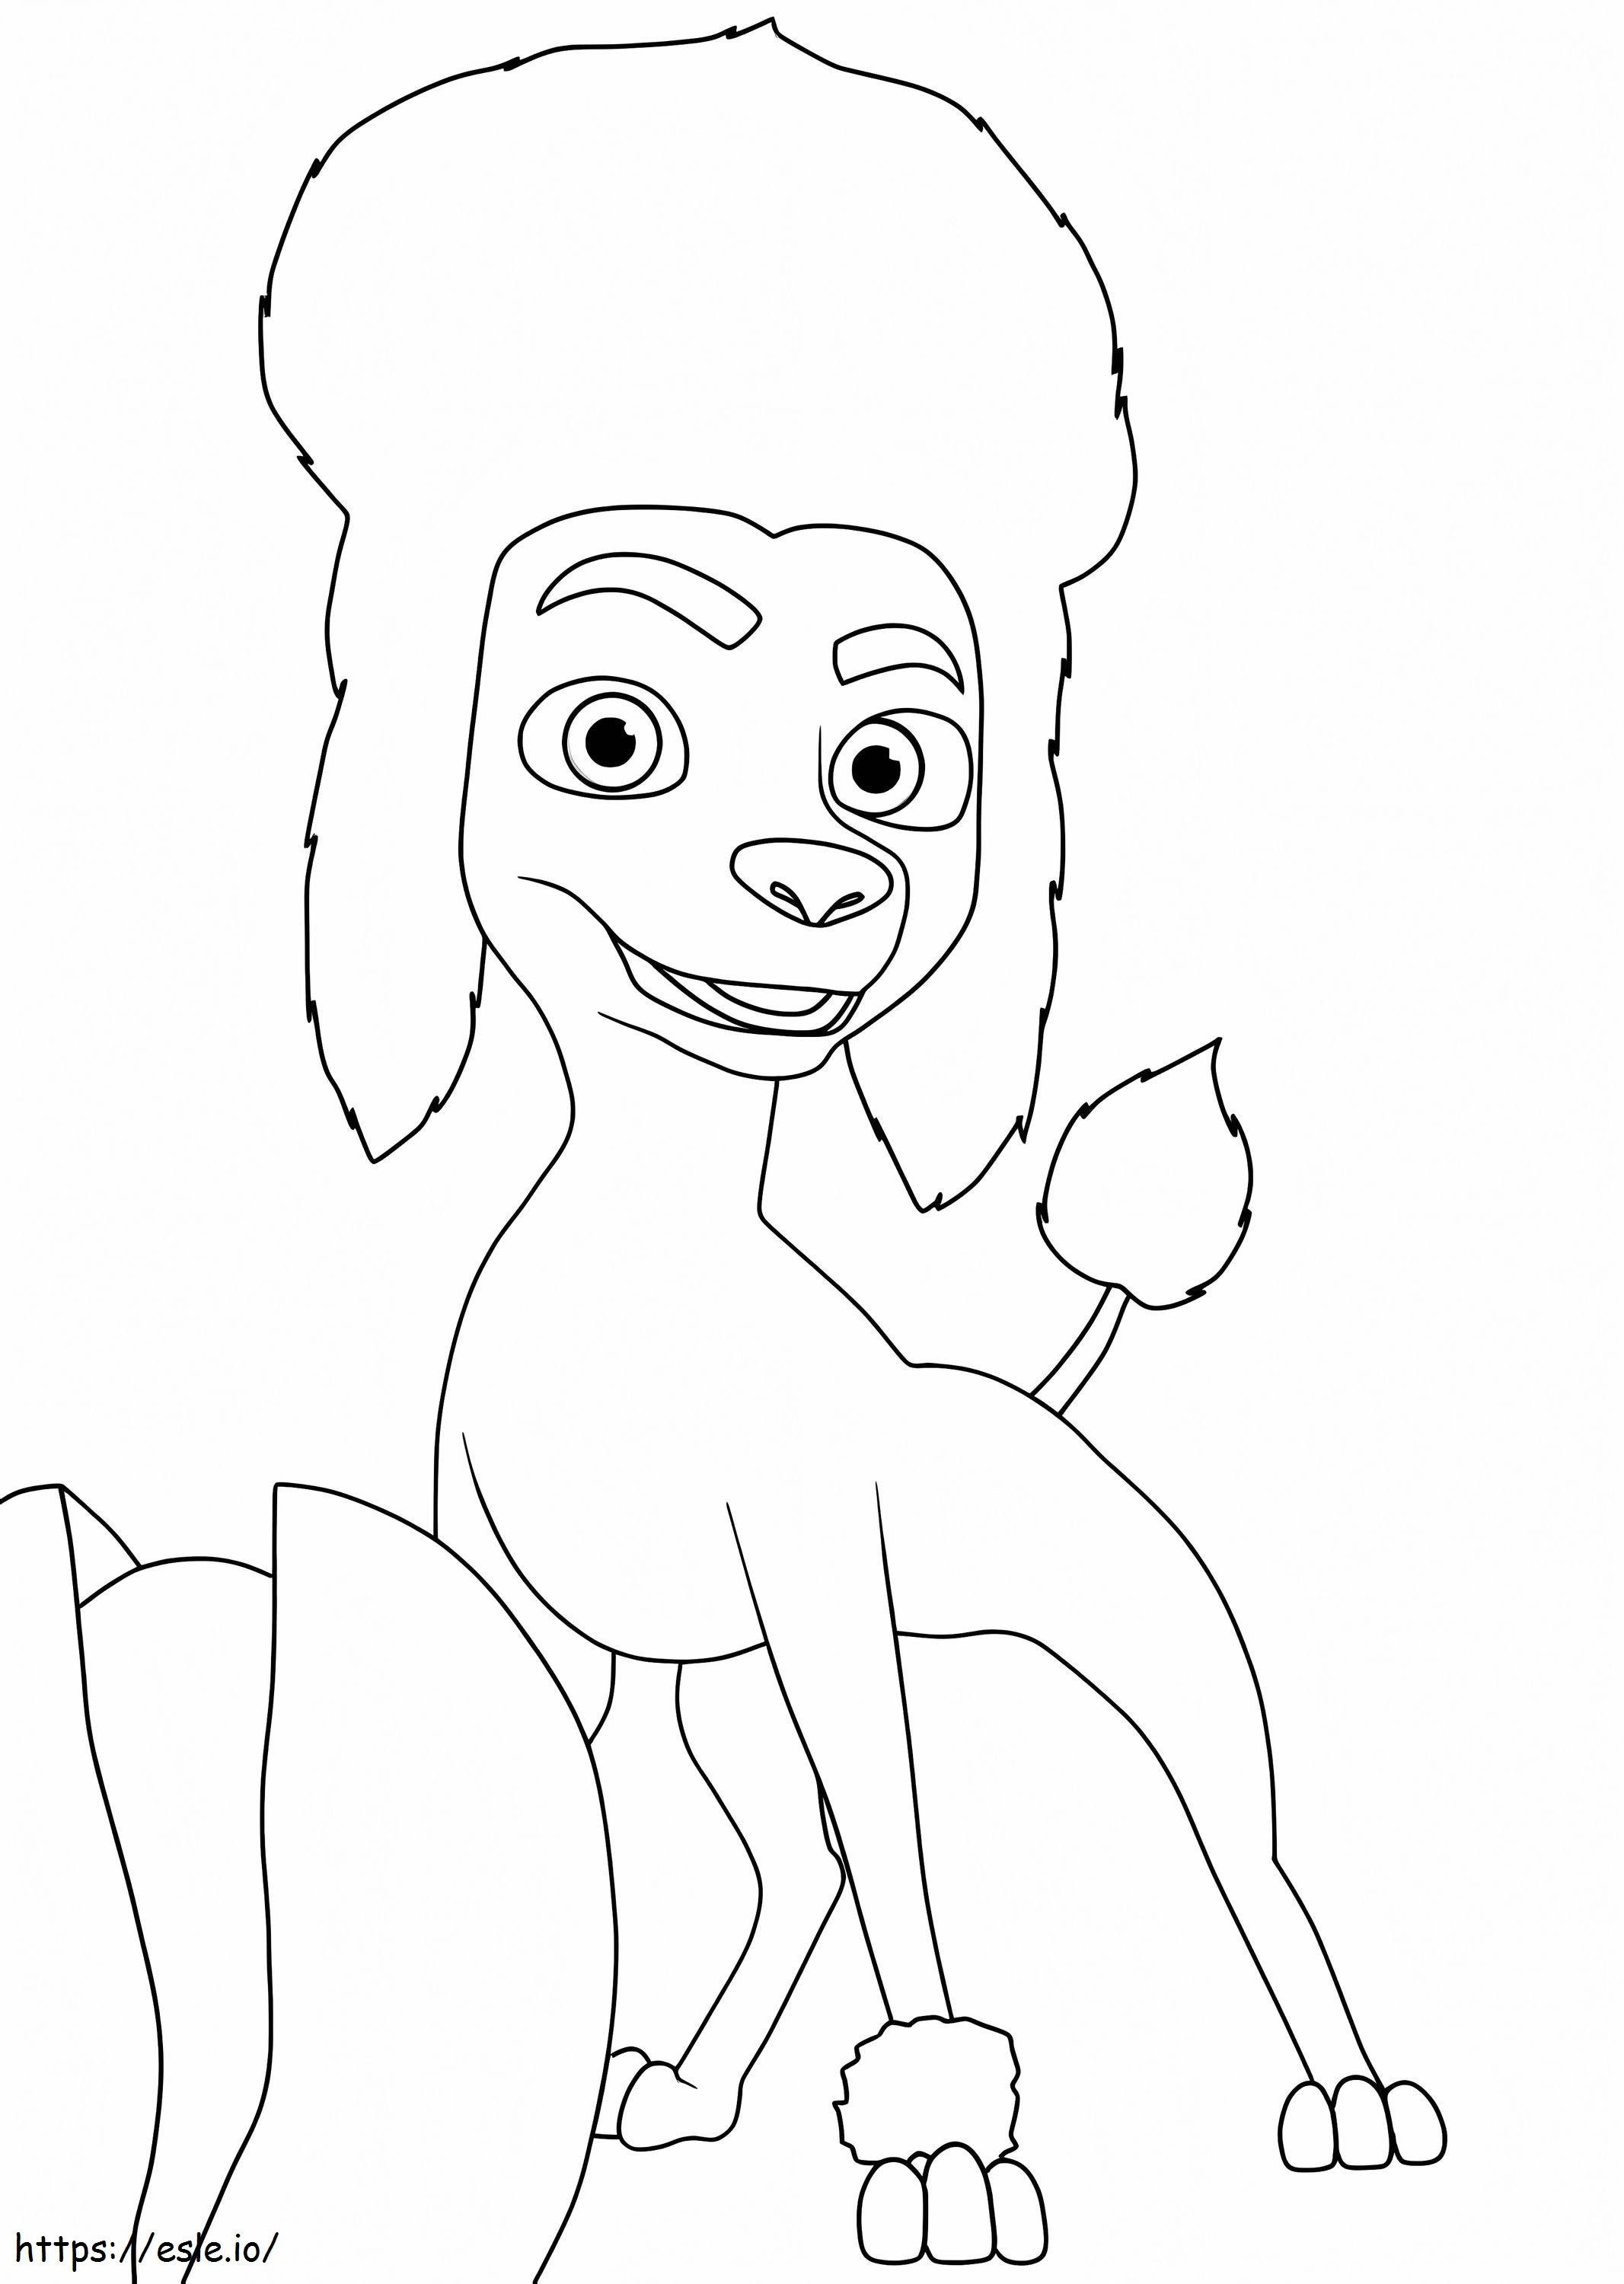 Freddy Smiling coloring page